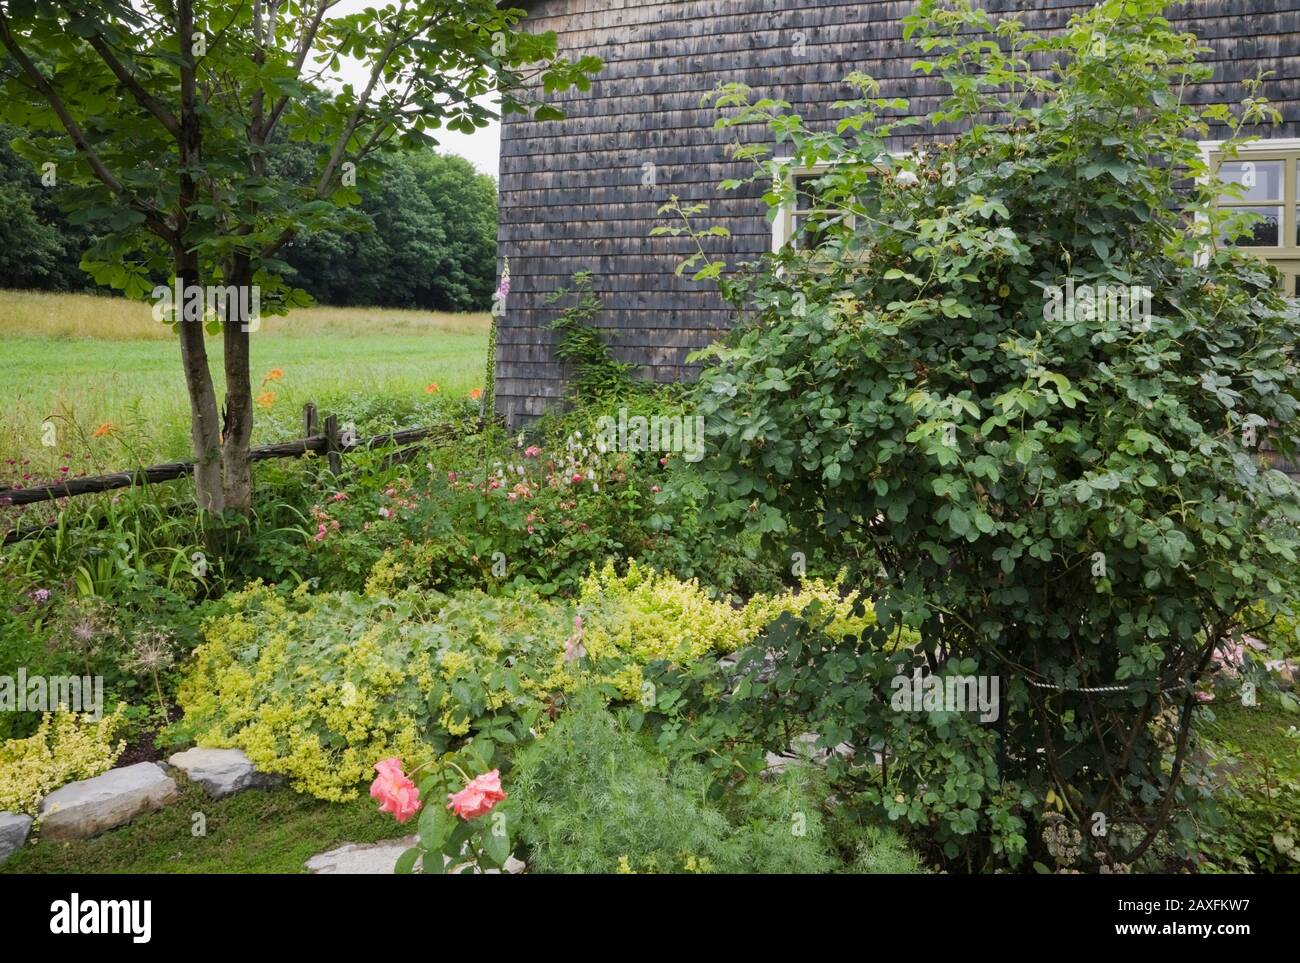 Stone edged border with Alchemilla mollis - Lady's mantle, perennial flowers including pink Paeonia - Peonies next to old cedar shingles building Stock Photo